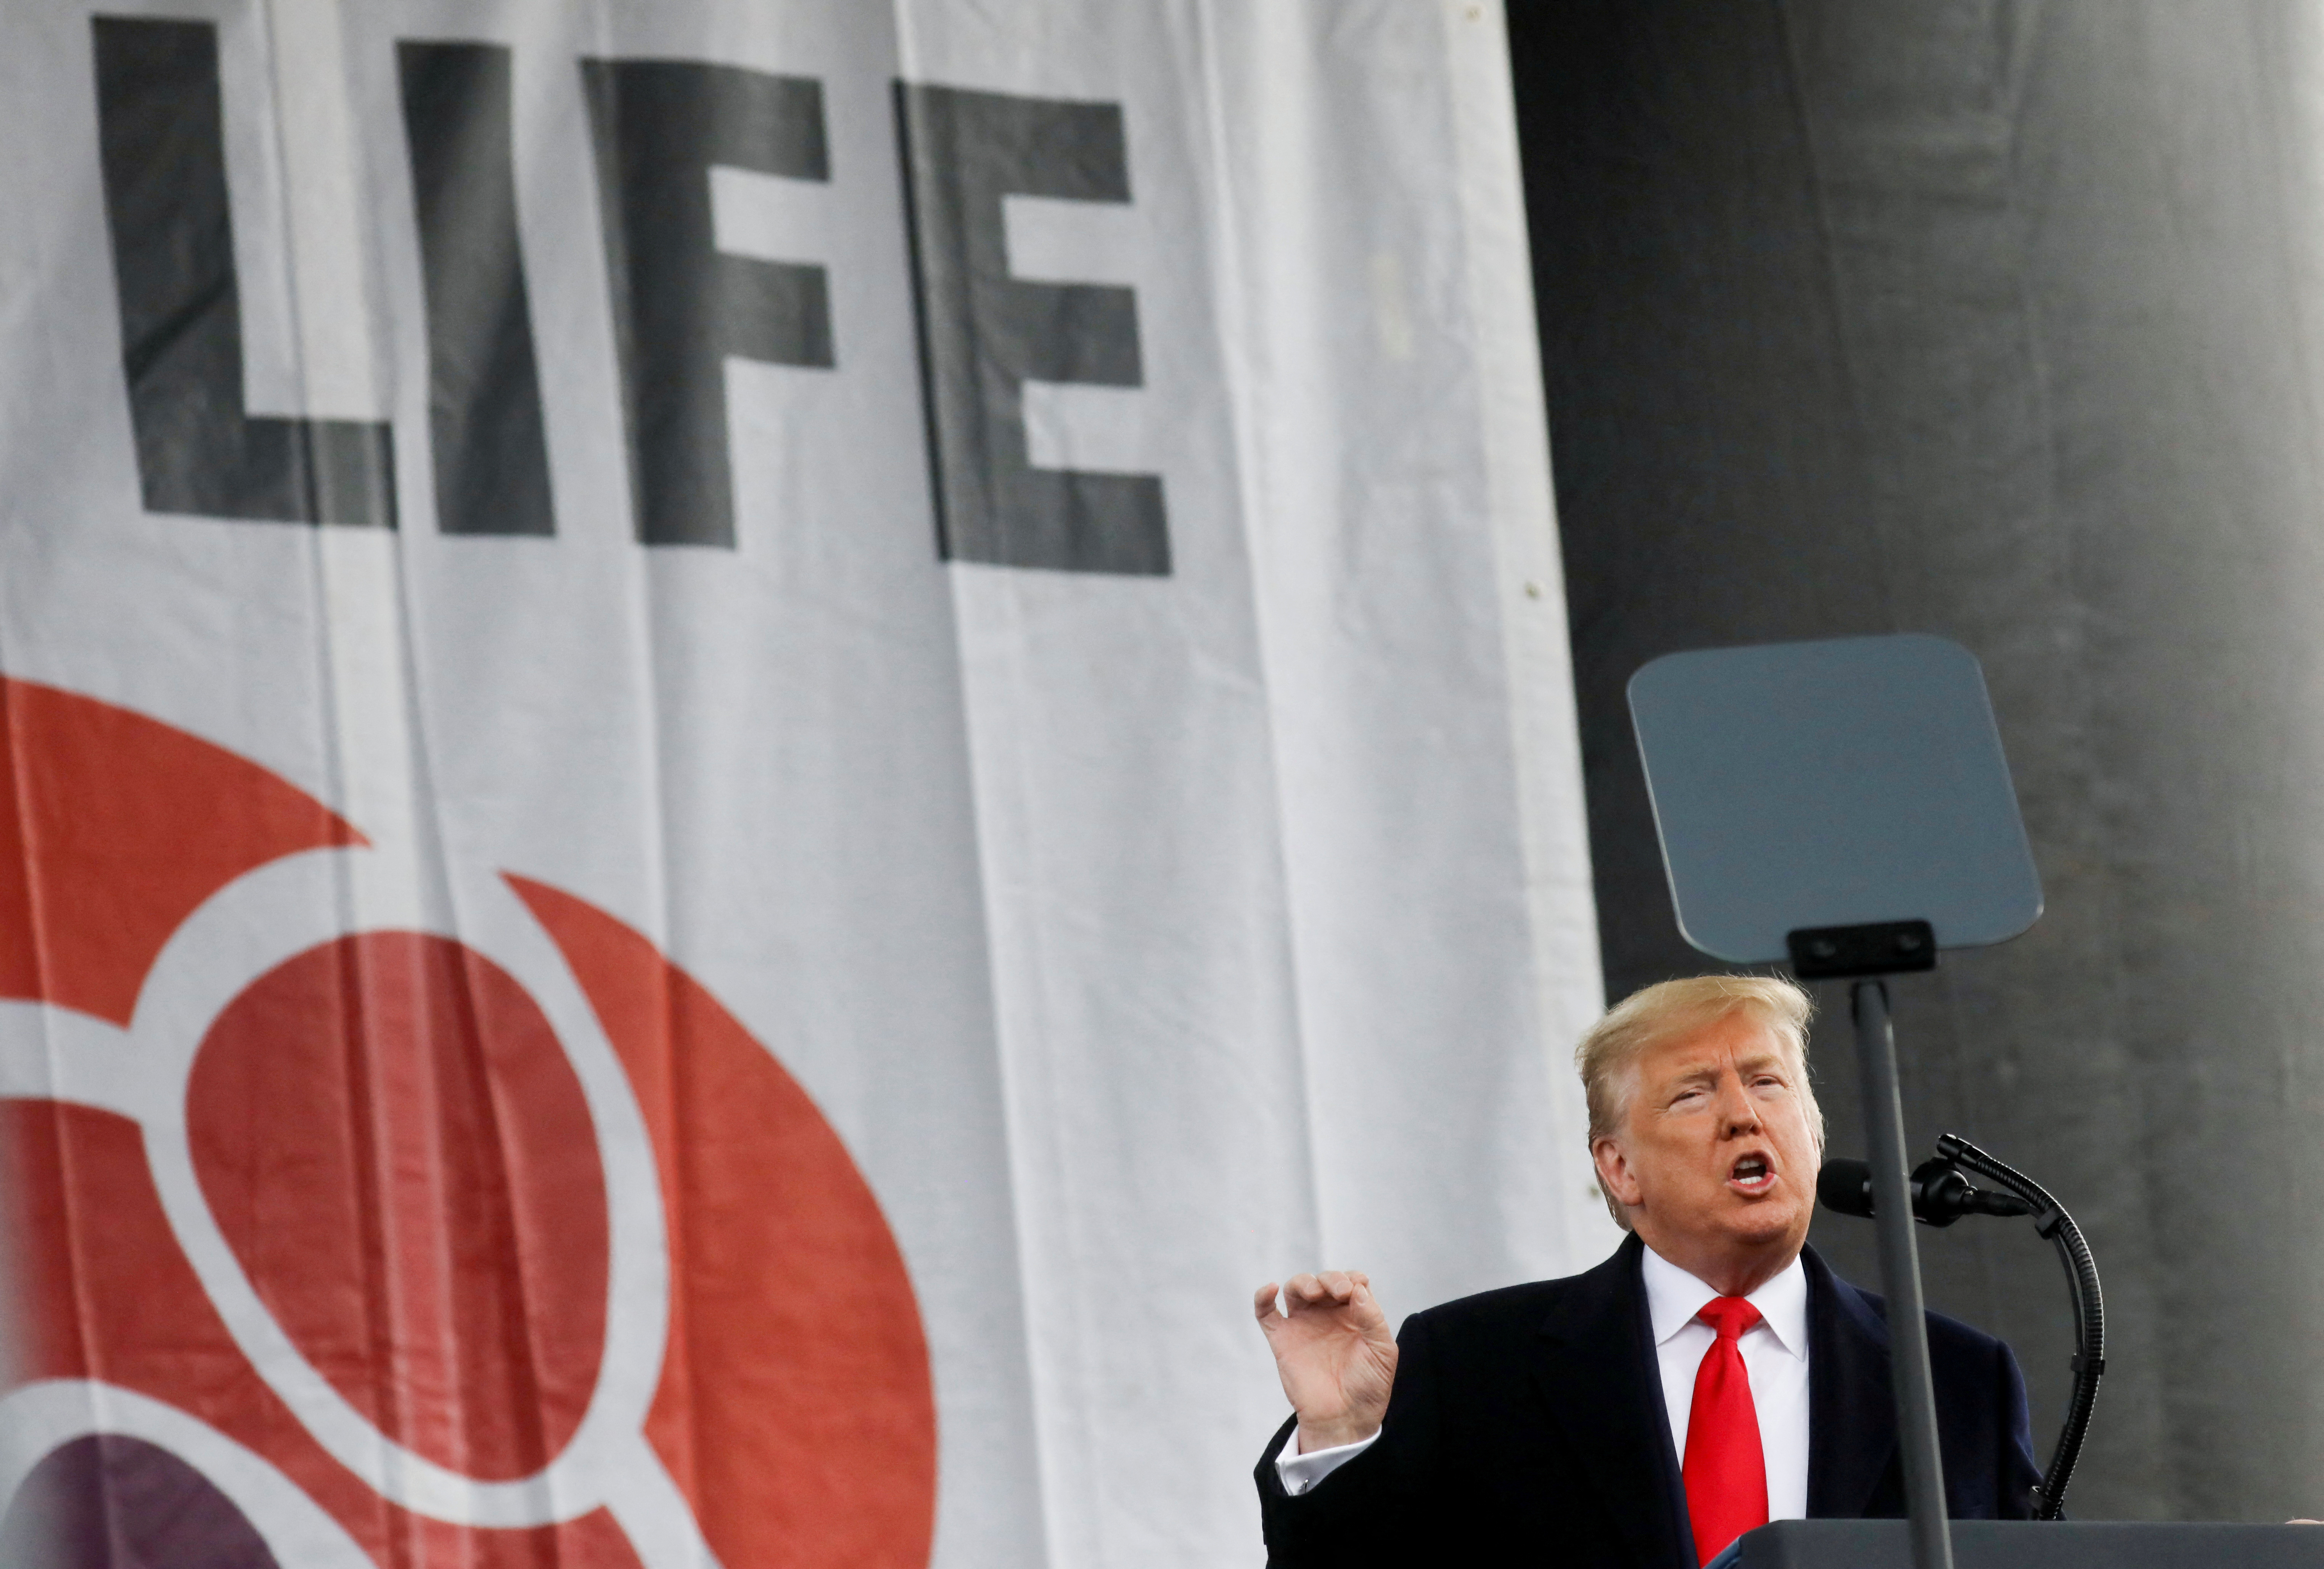 U.S. President Trump addresses the 47th annual March for Life in Washington